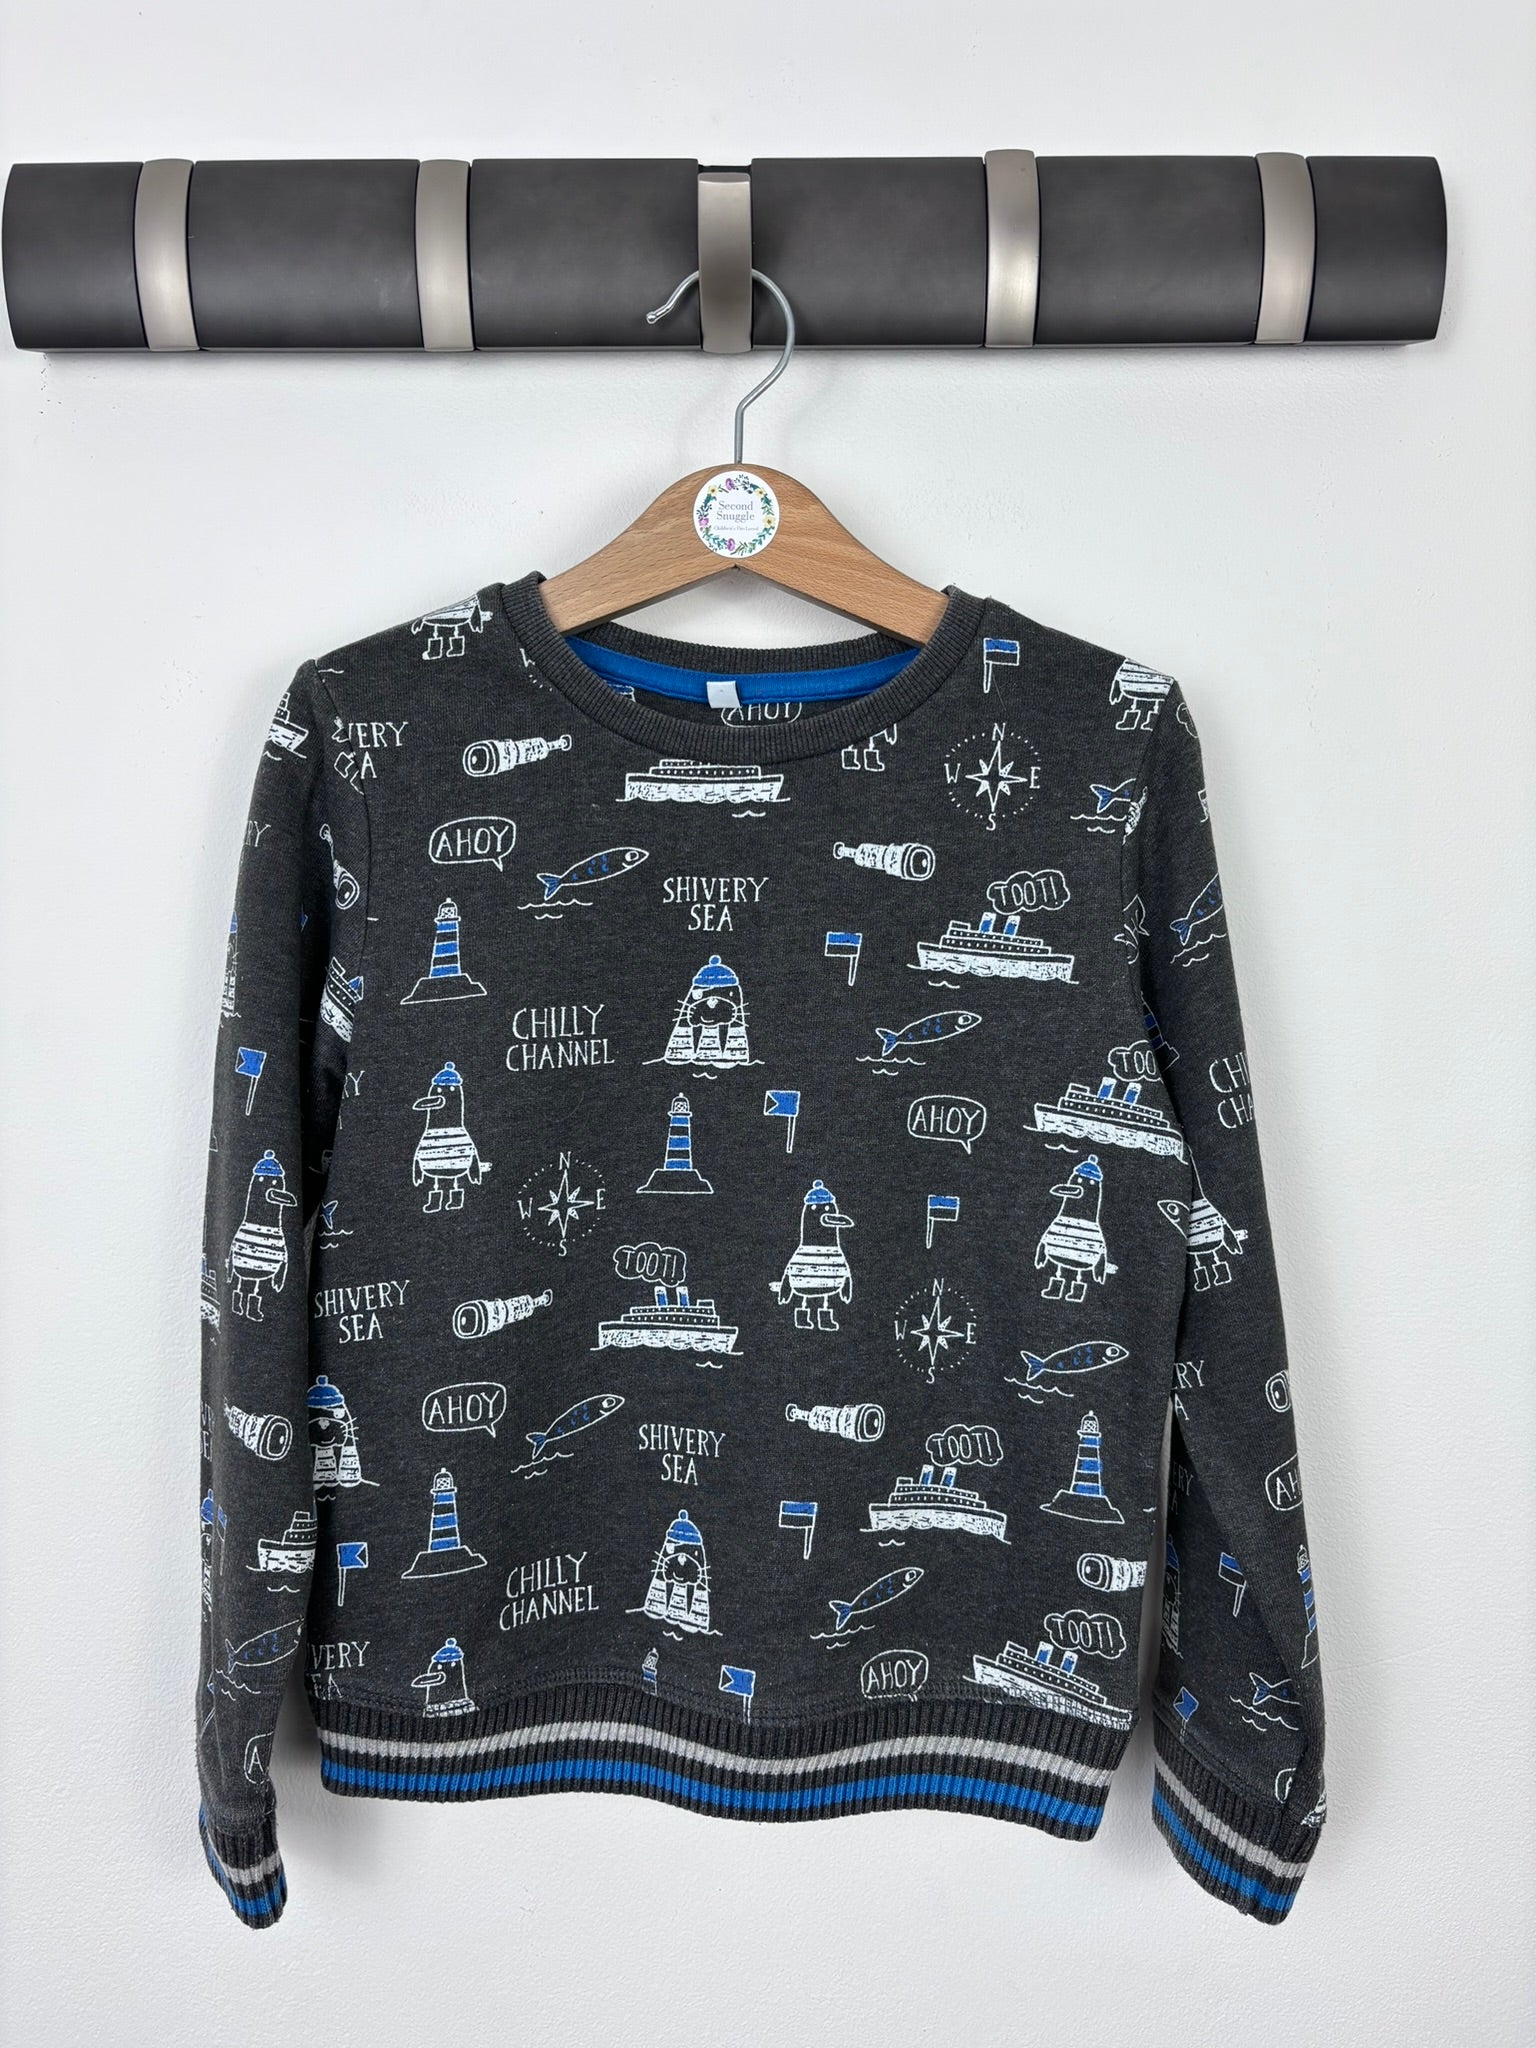 M&S 5-6 Years-Jumpers-Second Snuggle Preloved